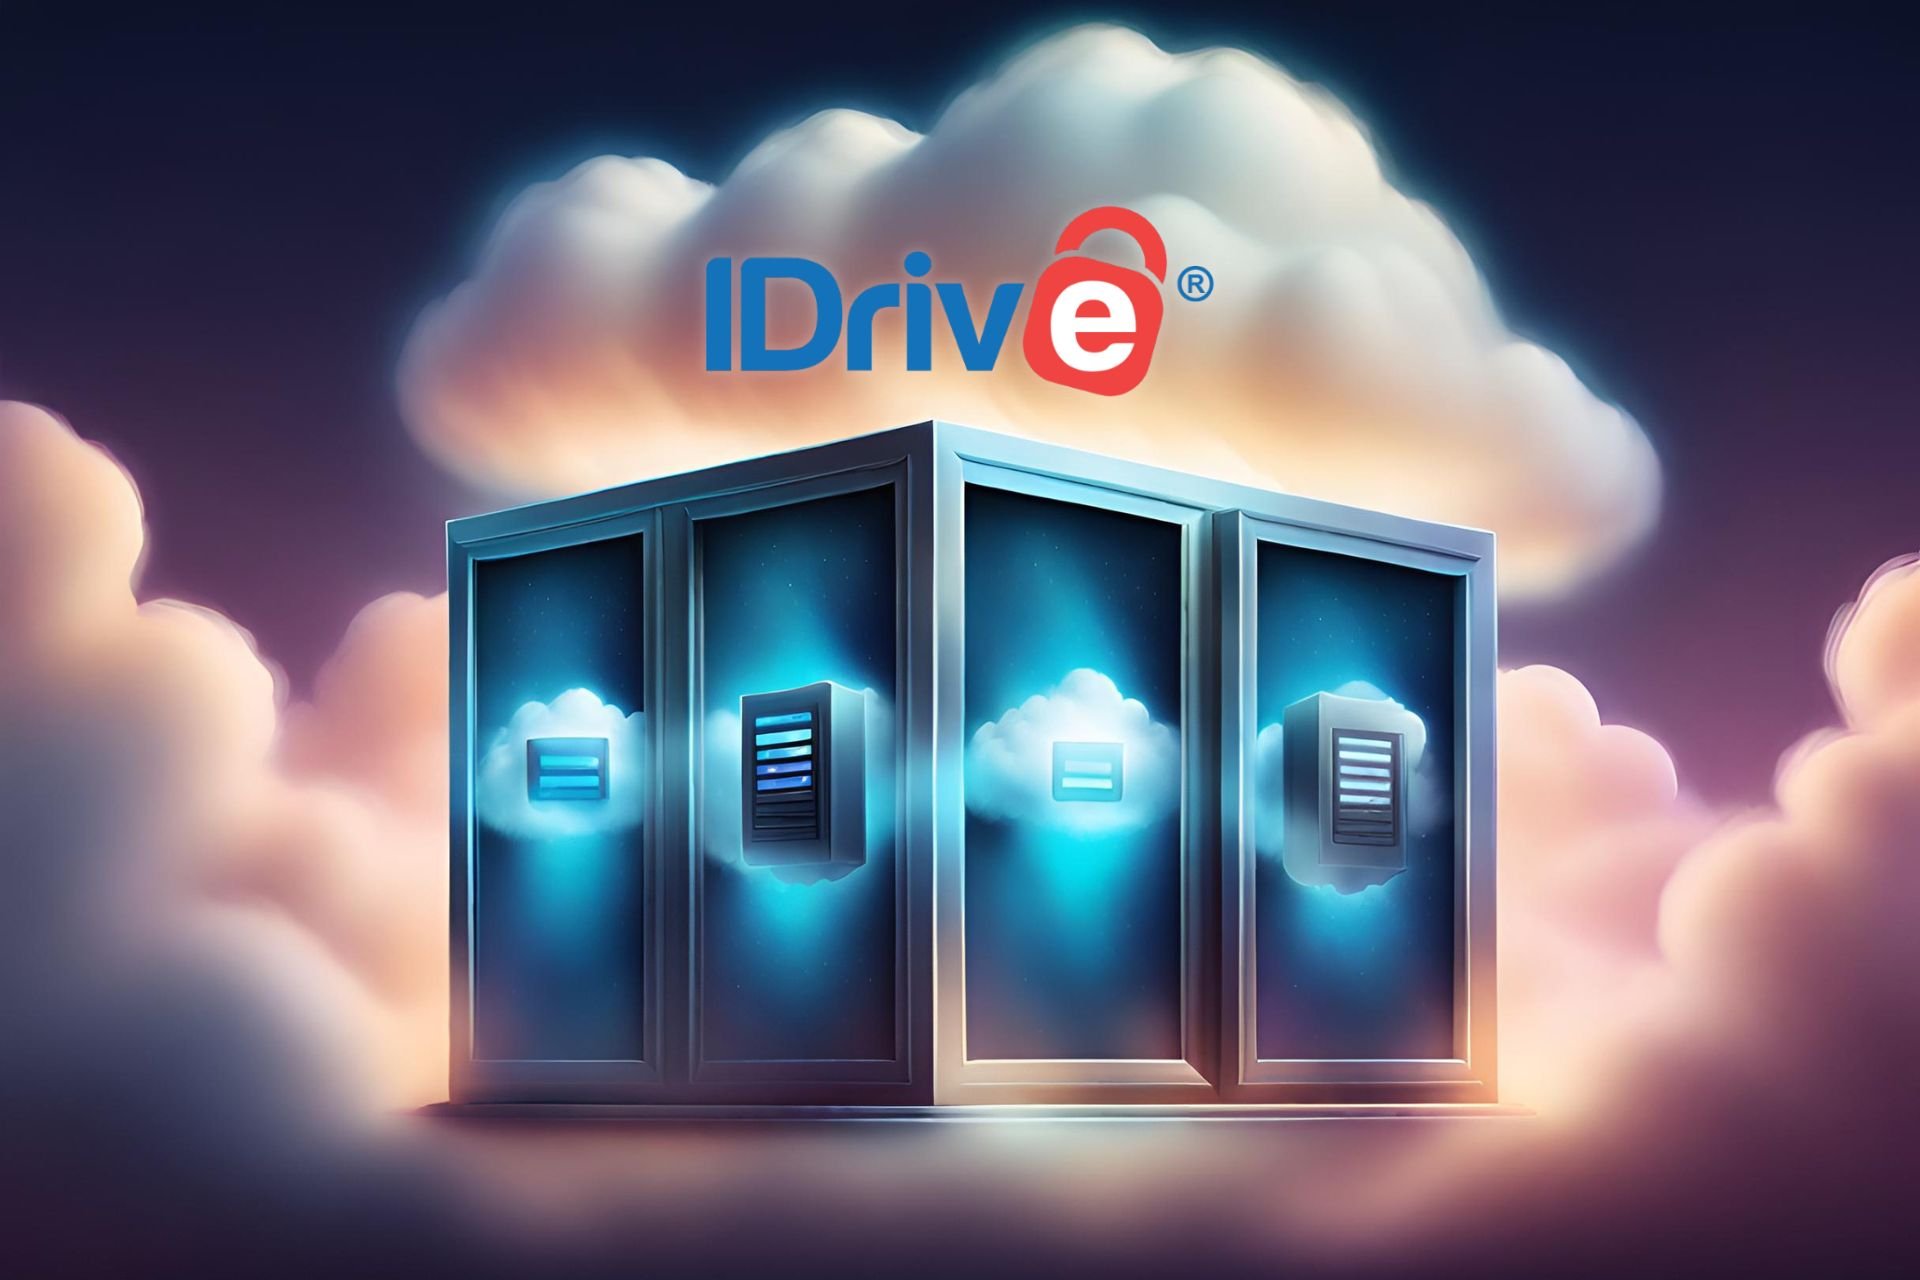 IDrive will bring unlimited cloud-to-cloud backup for Microsoft Office 365